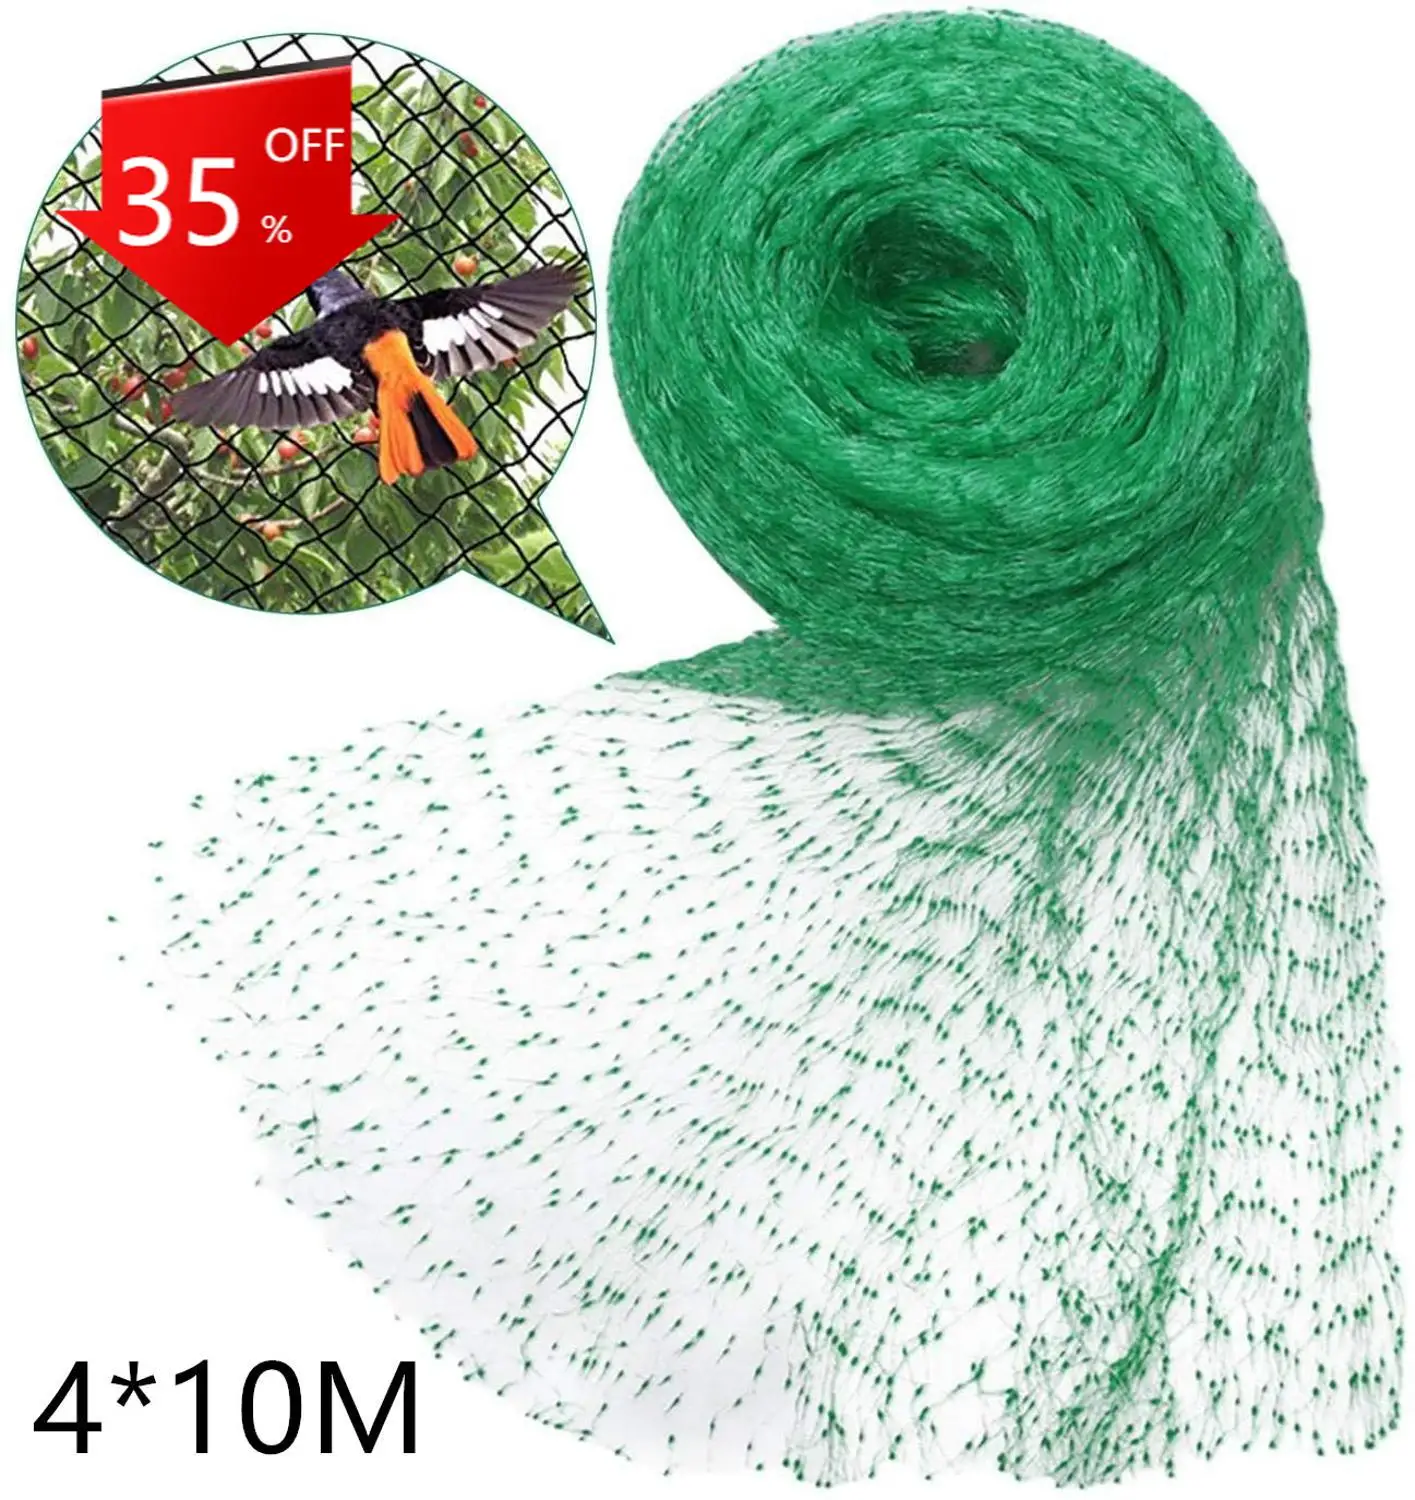 EHIOG Bird Netting Garden Net Doesnt Tangle and Reusable Fencing Protect Fruit Vegetables from Birds Deer 